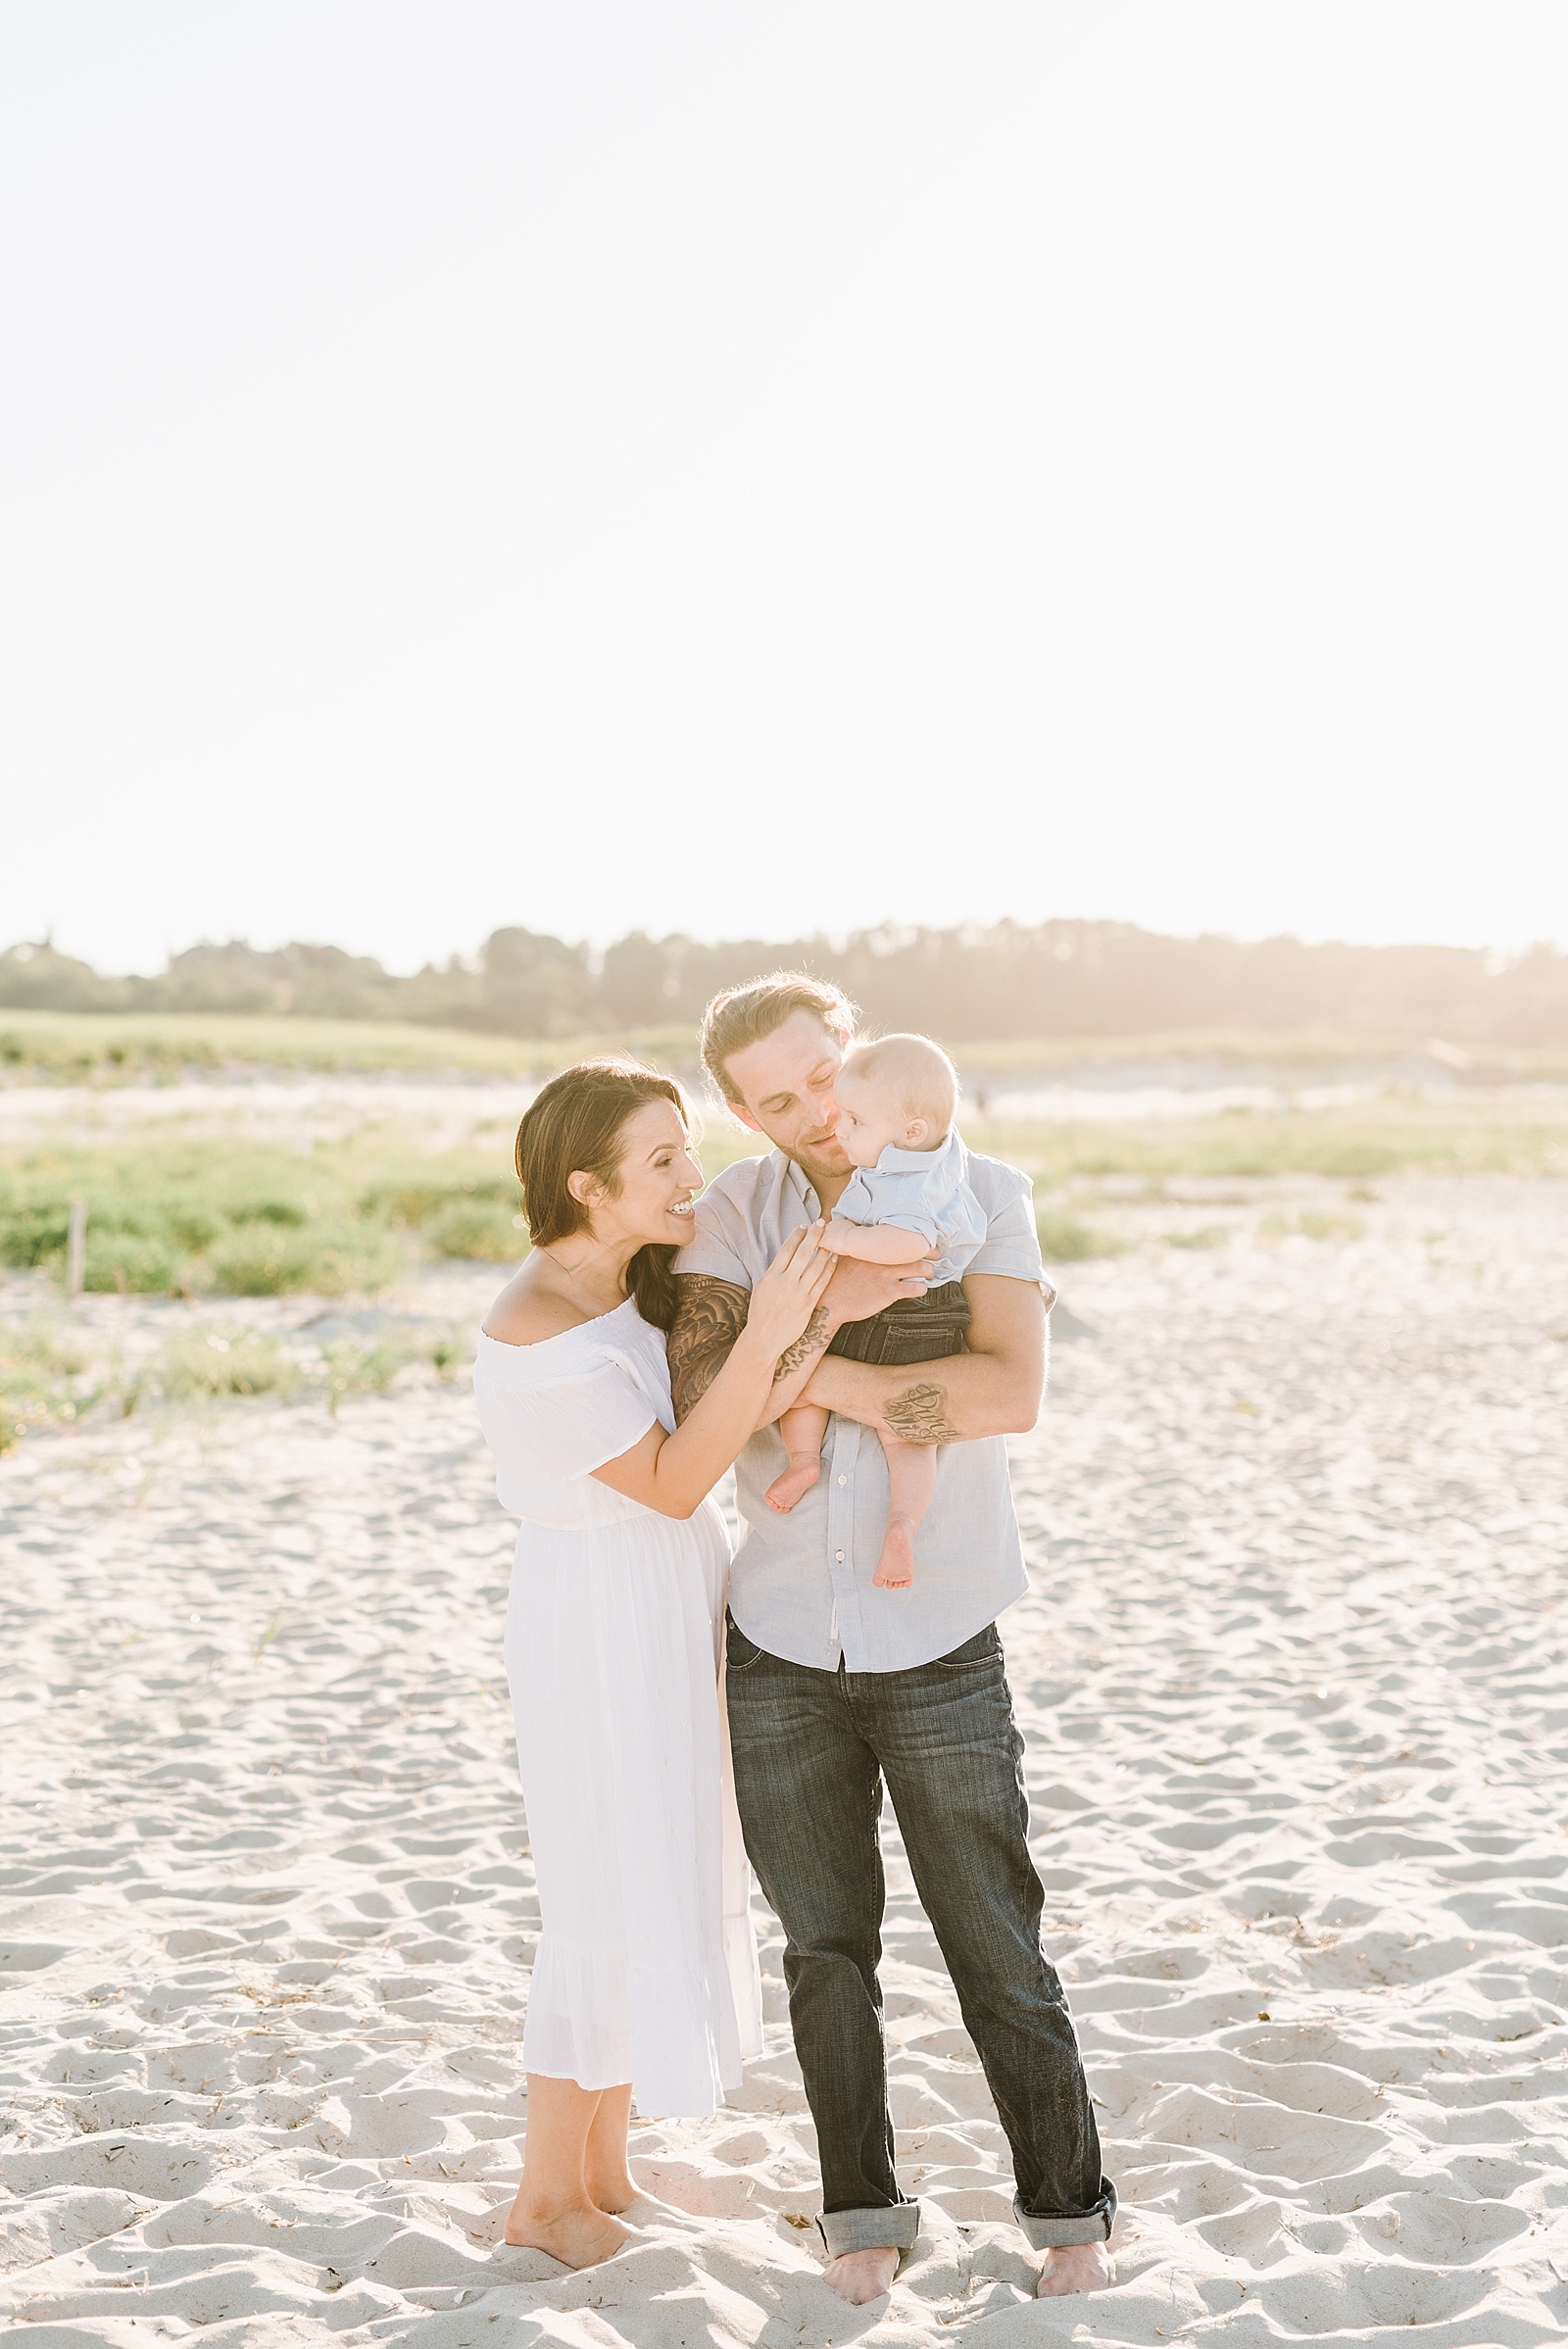 Sweet Sunset Family Session at Crane Beach in Ipswich, MA by Boston Wedding & Portrait Photographer Annmarie Swift